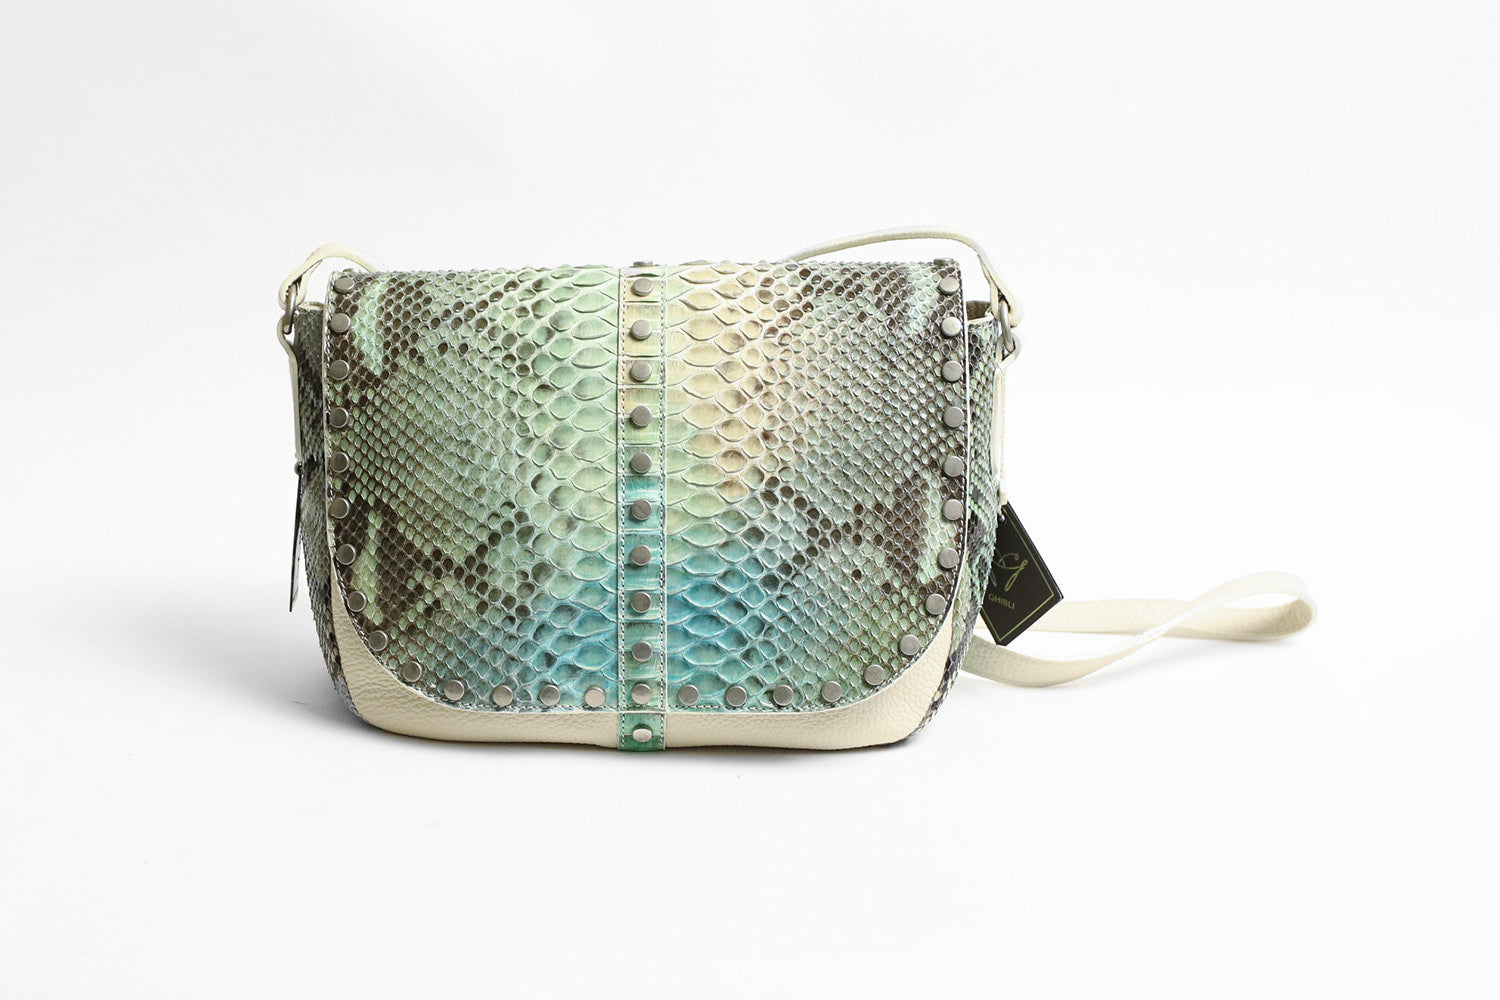 GHIBLI One-of-a-kind Made in Italy Imported Beautiful Python x Cowhide Combination Shoulder Bag 